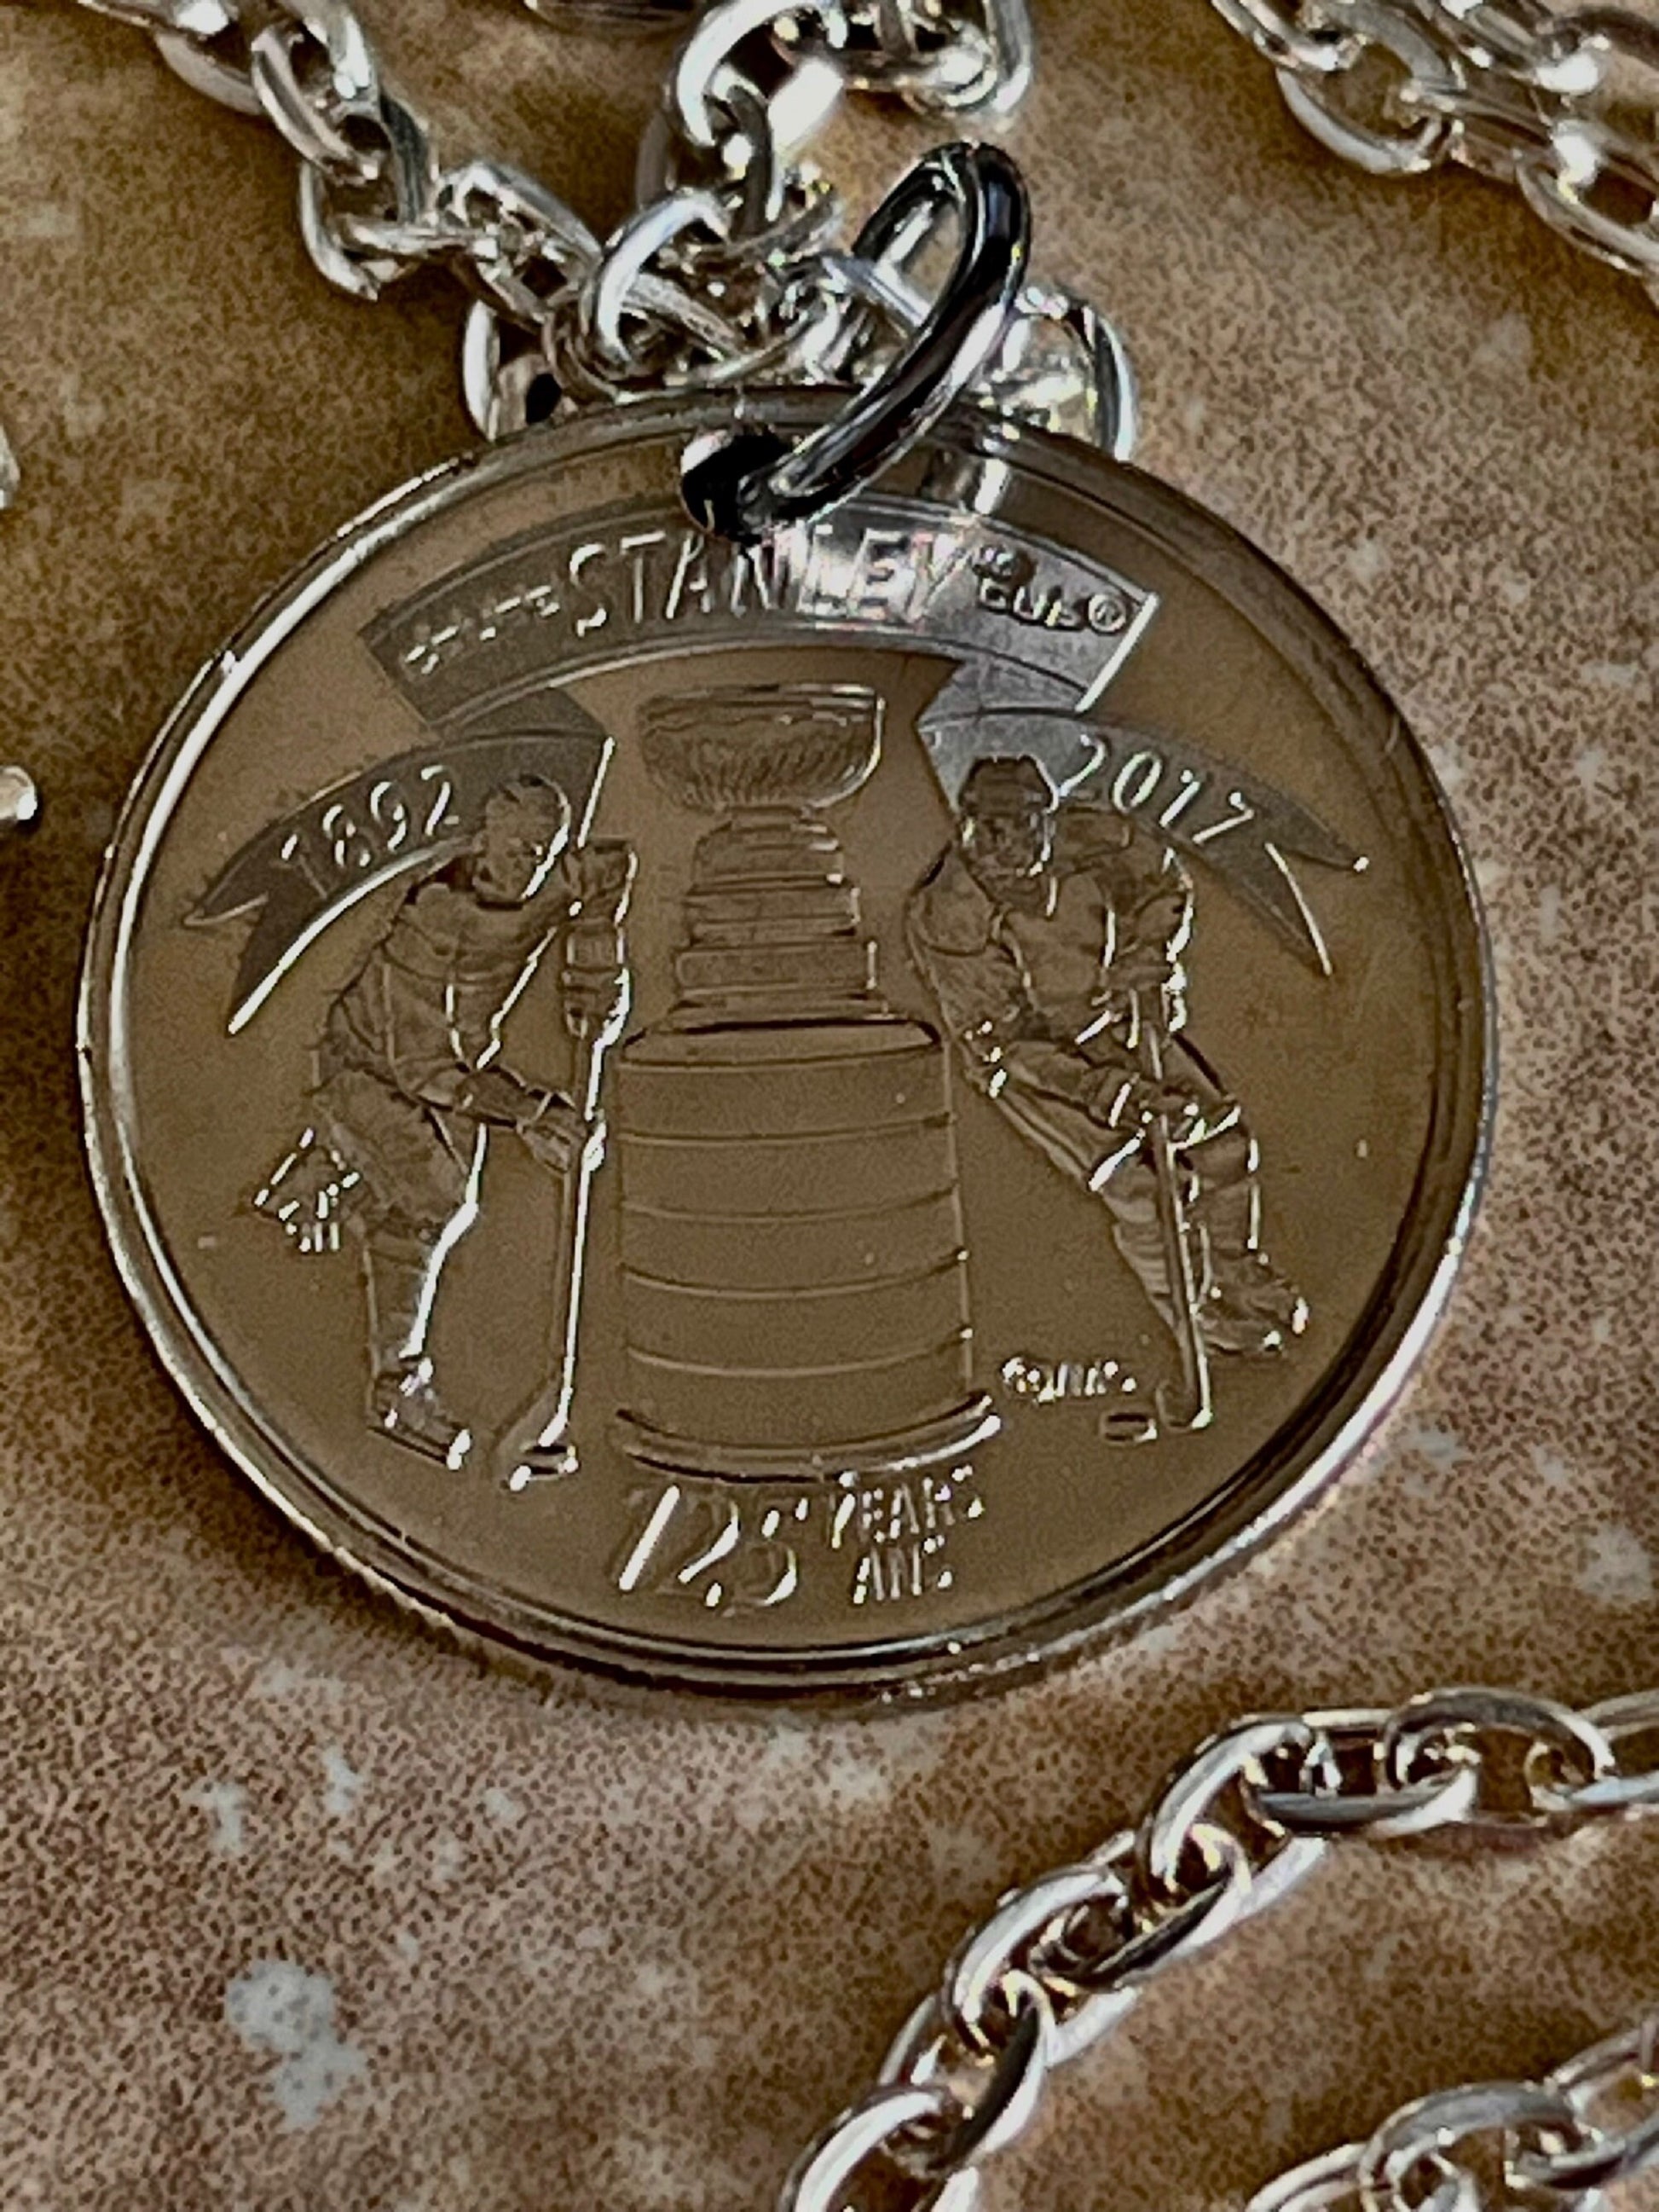 Canadian Quarter Necklace Pendant Canada NHL 125 Years Men's Hockey Personal Jewelry Gift Friend Charm For Him Her World Coin Collector